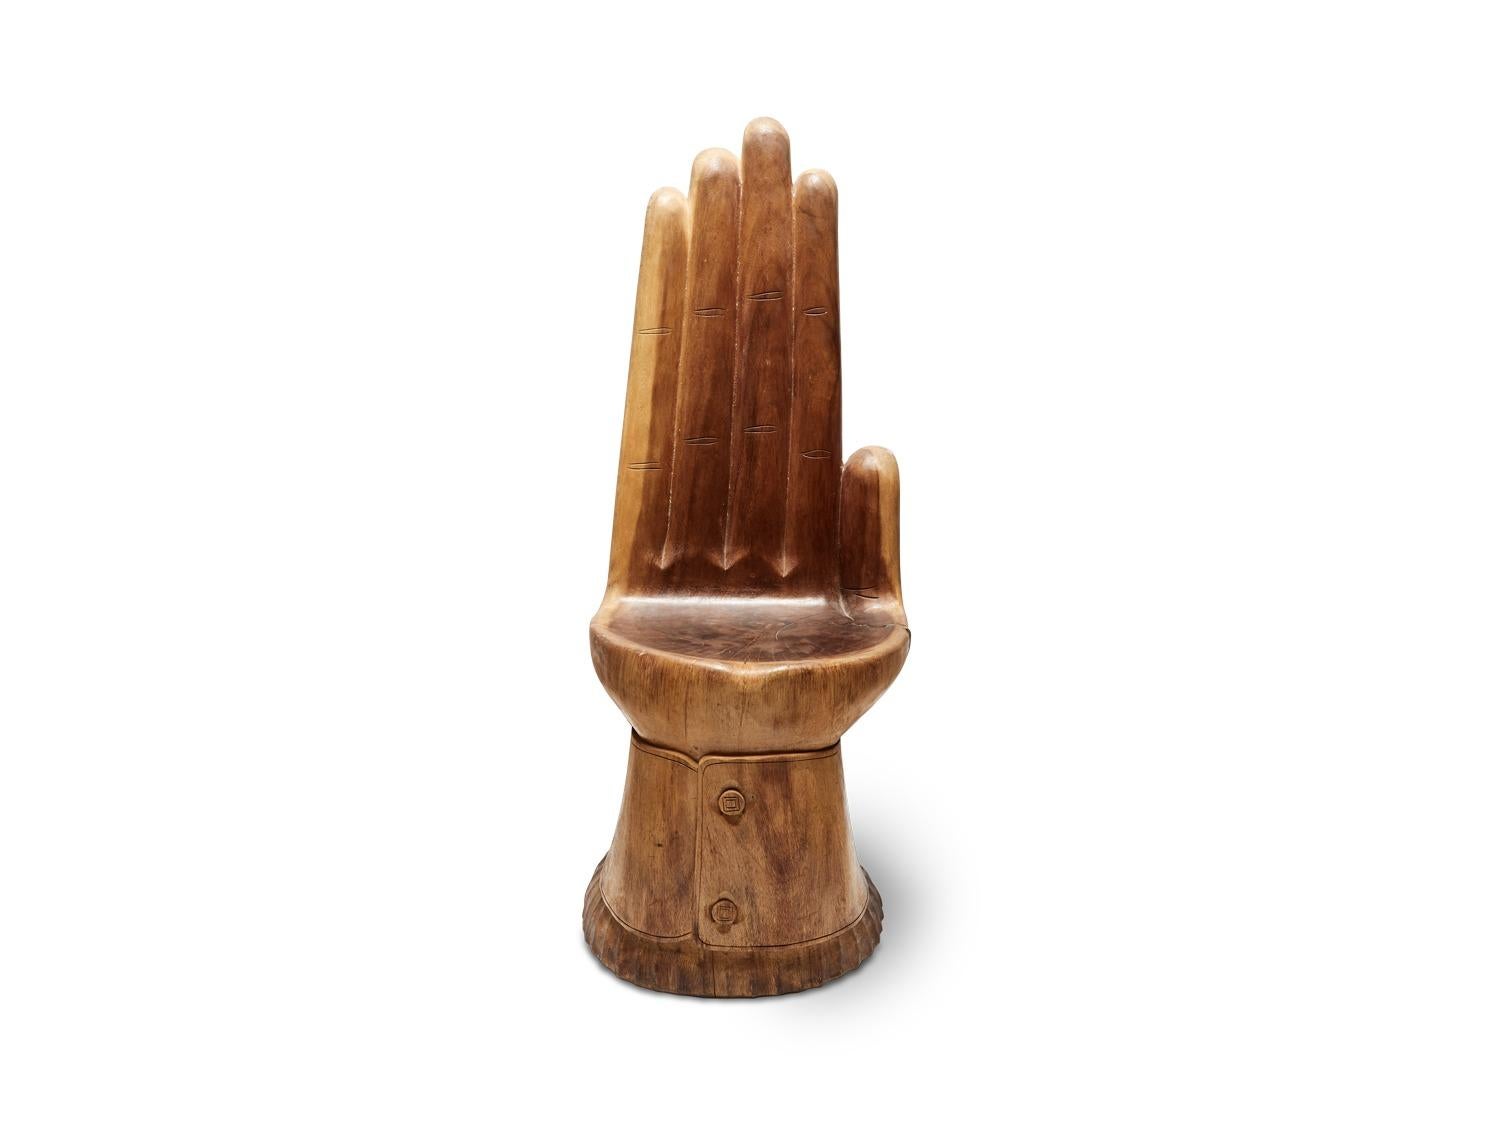 Brazilian carved wood hand chair (circa 1960s).

Dimensions: 17 W, 20 D, 42 H

Seat height 18 H.